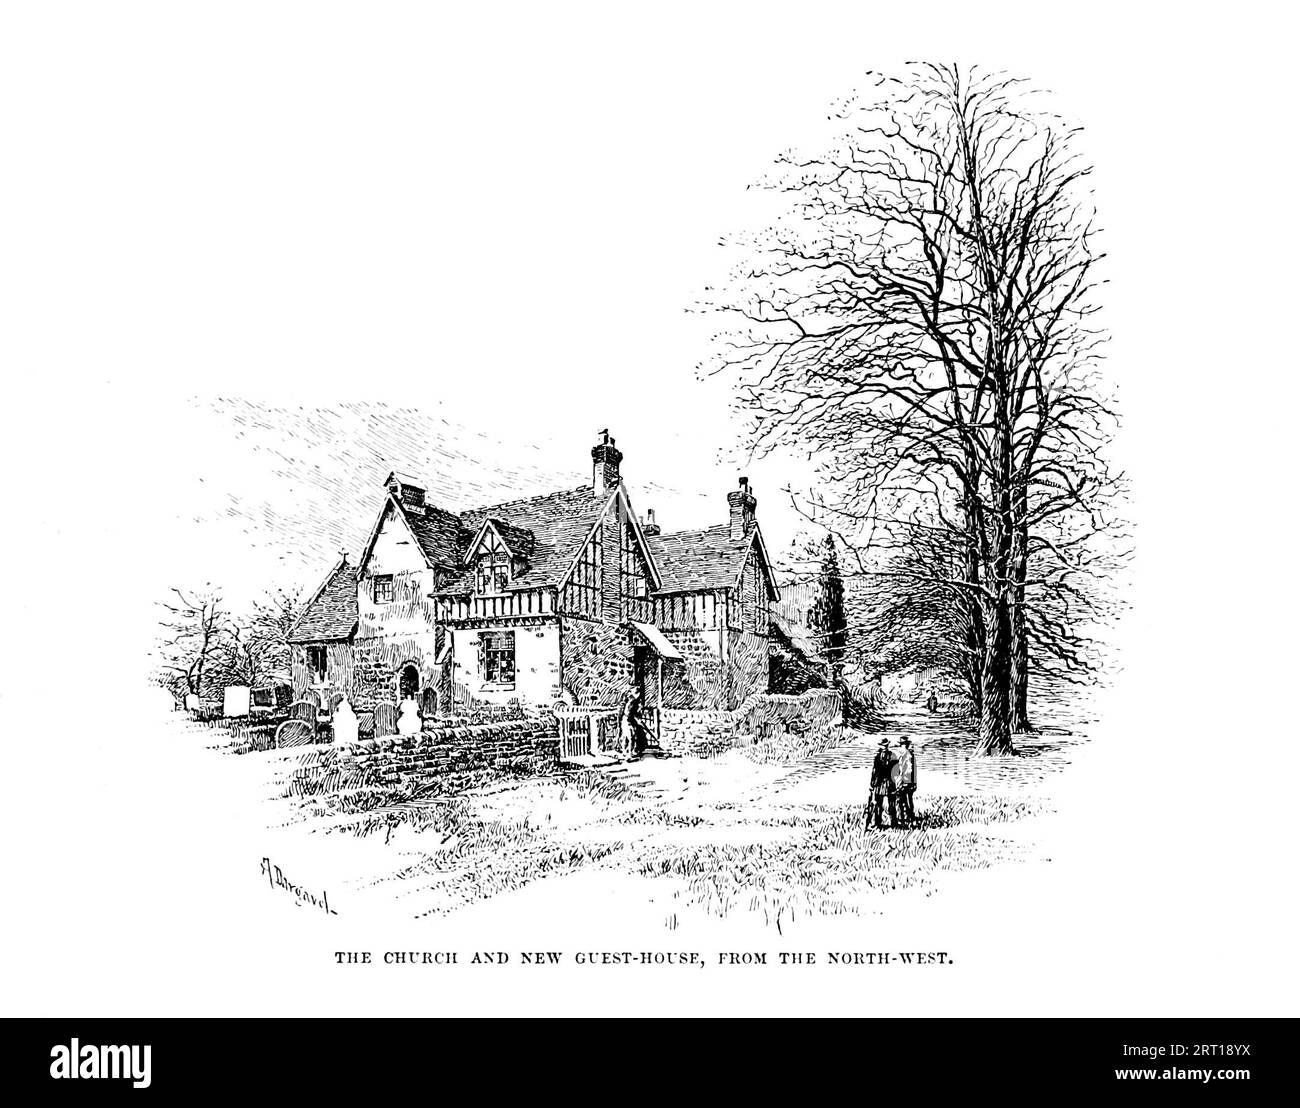 The Church and New Guest House from the North West Deepdale, Preston, Lancashire, Inghilterra. Dal libro ' cattedrali, abbazie e chiese d'Inghilterra e Galles : Descriptive, Historical, Pictorial ' di Bonney, T. G. (Thomas George), 1833-1923; Publisher London : Cassell 1890 Foto Stock